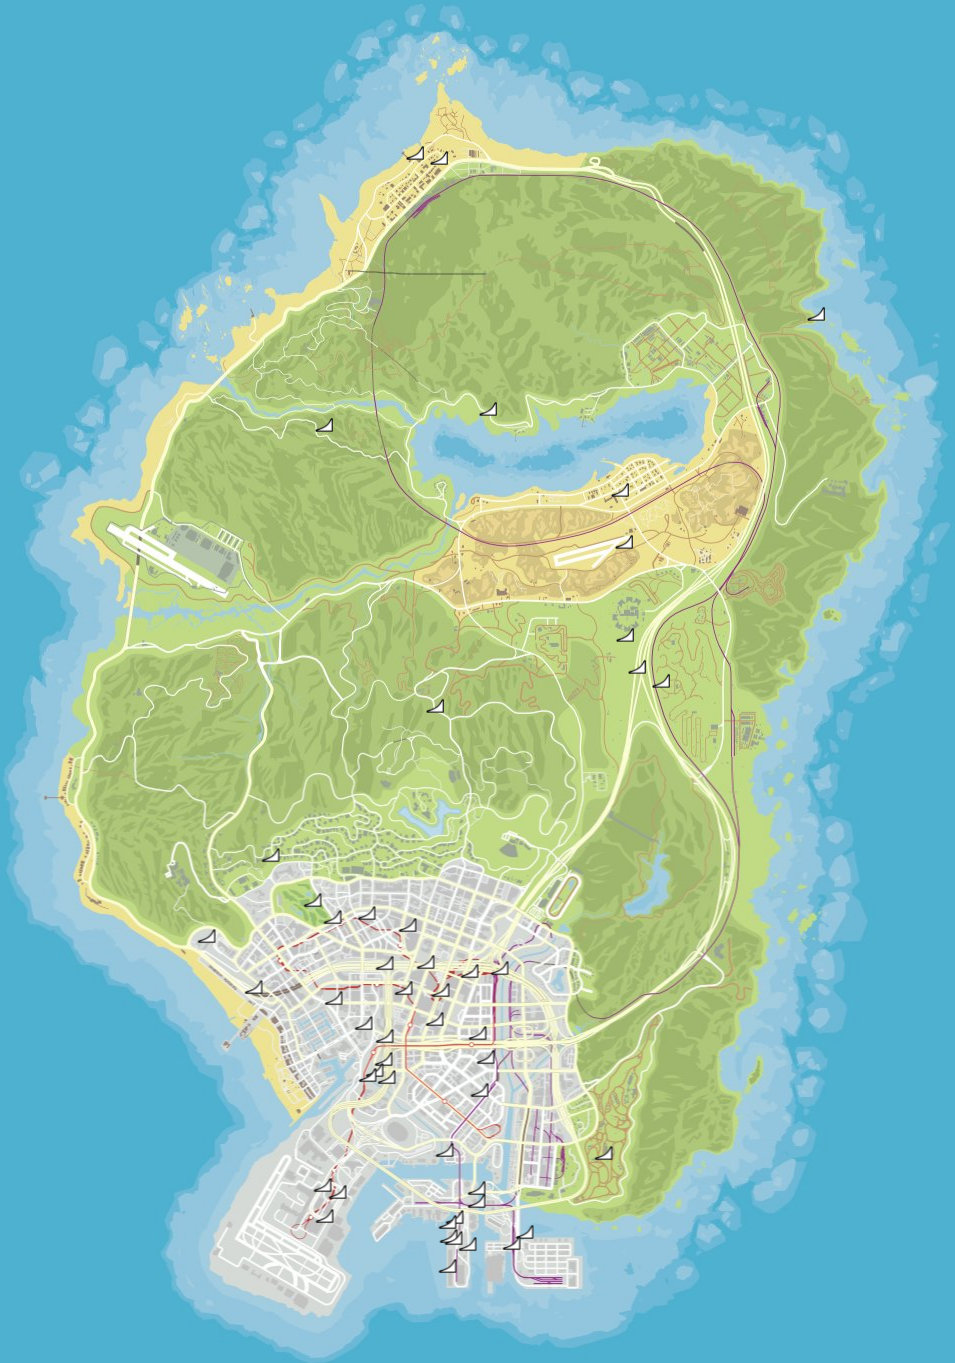 Weapon Spawn Location - GTA: San Andreas Guide - IGN